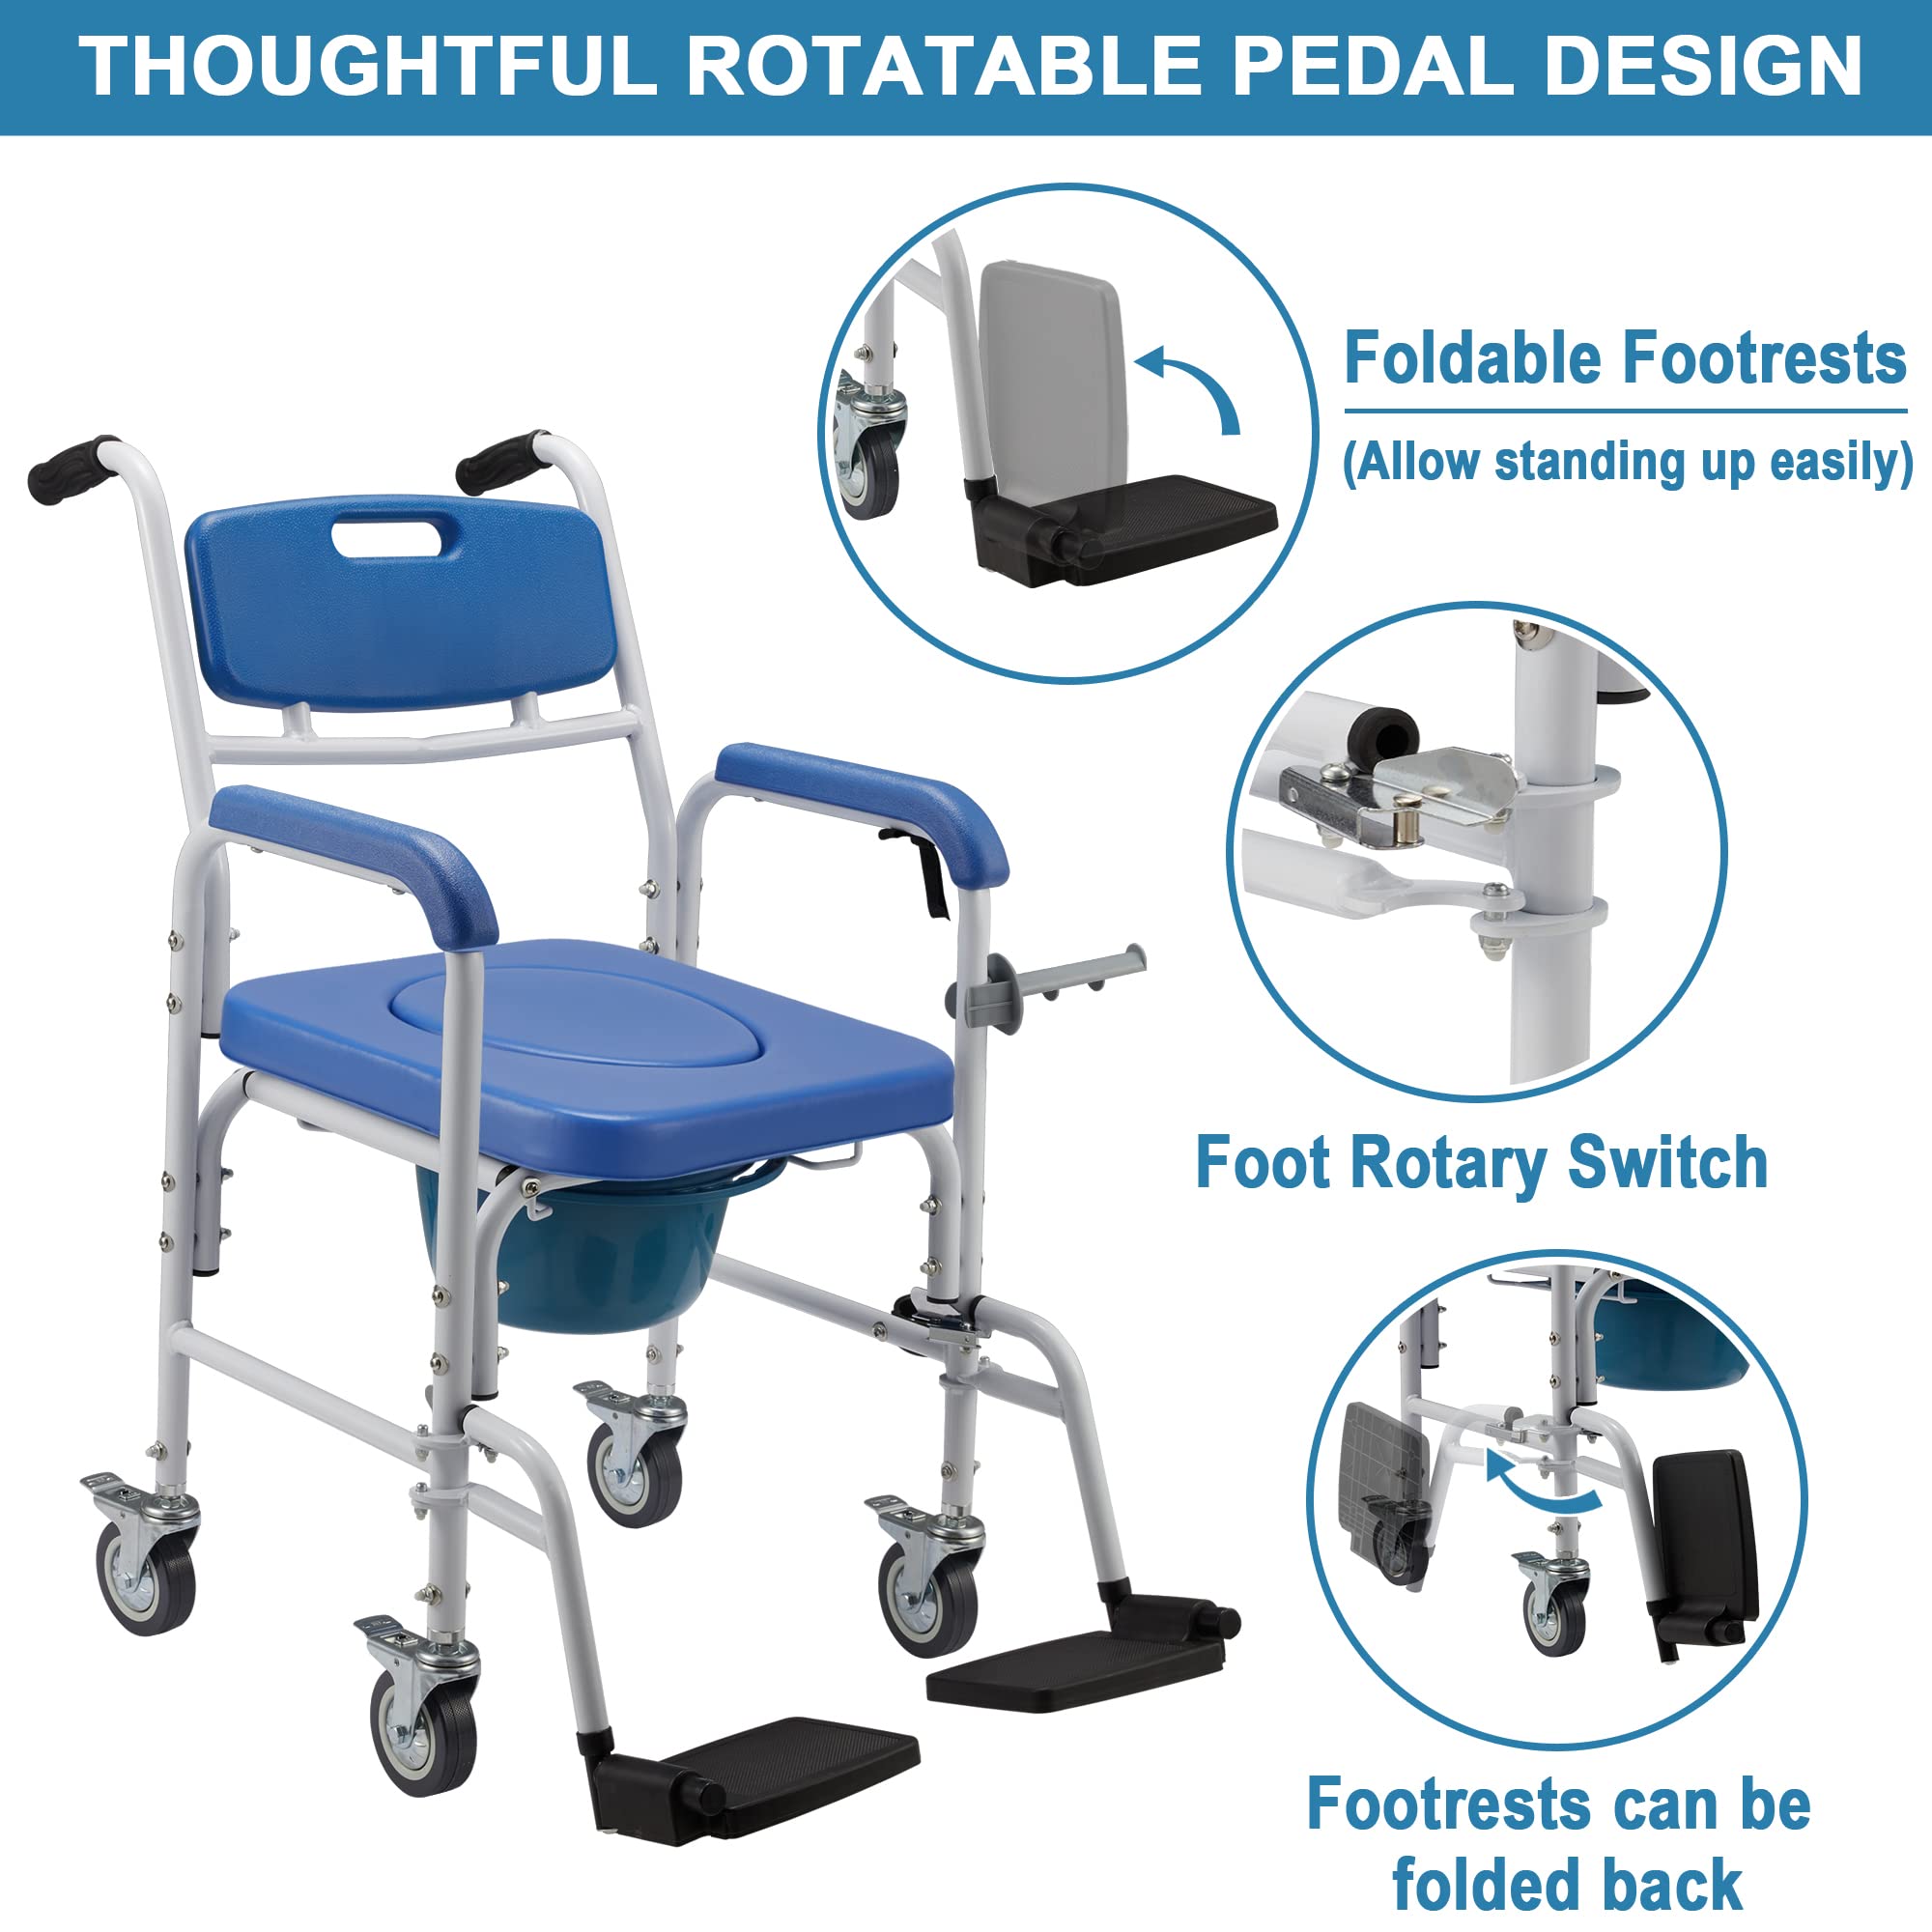 Homguava Bedside Commode Chair, 4 in 1 Shower Commode Wheelchair Rolling Transport Chair Toilet with Arms for Seniors and Disabled Weight Capacity 350lbs (Blue)